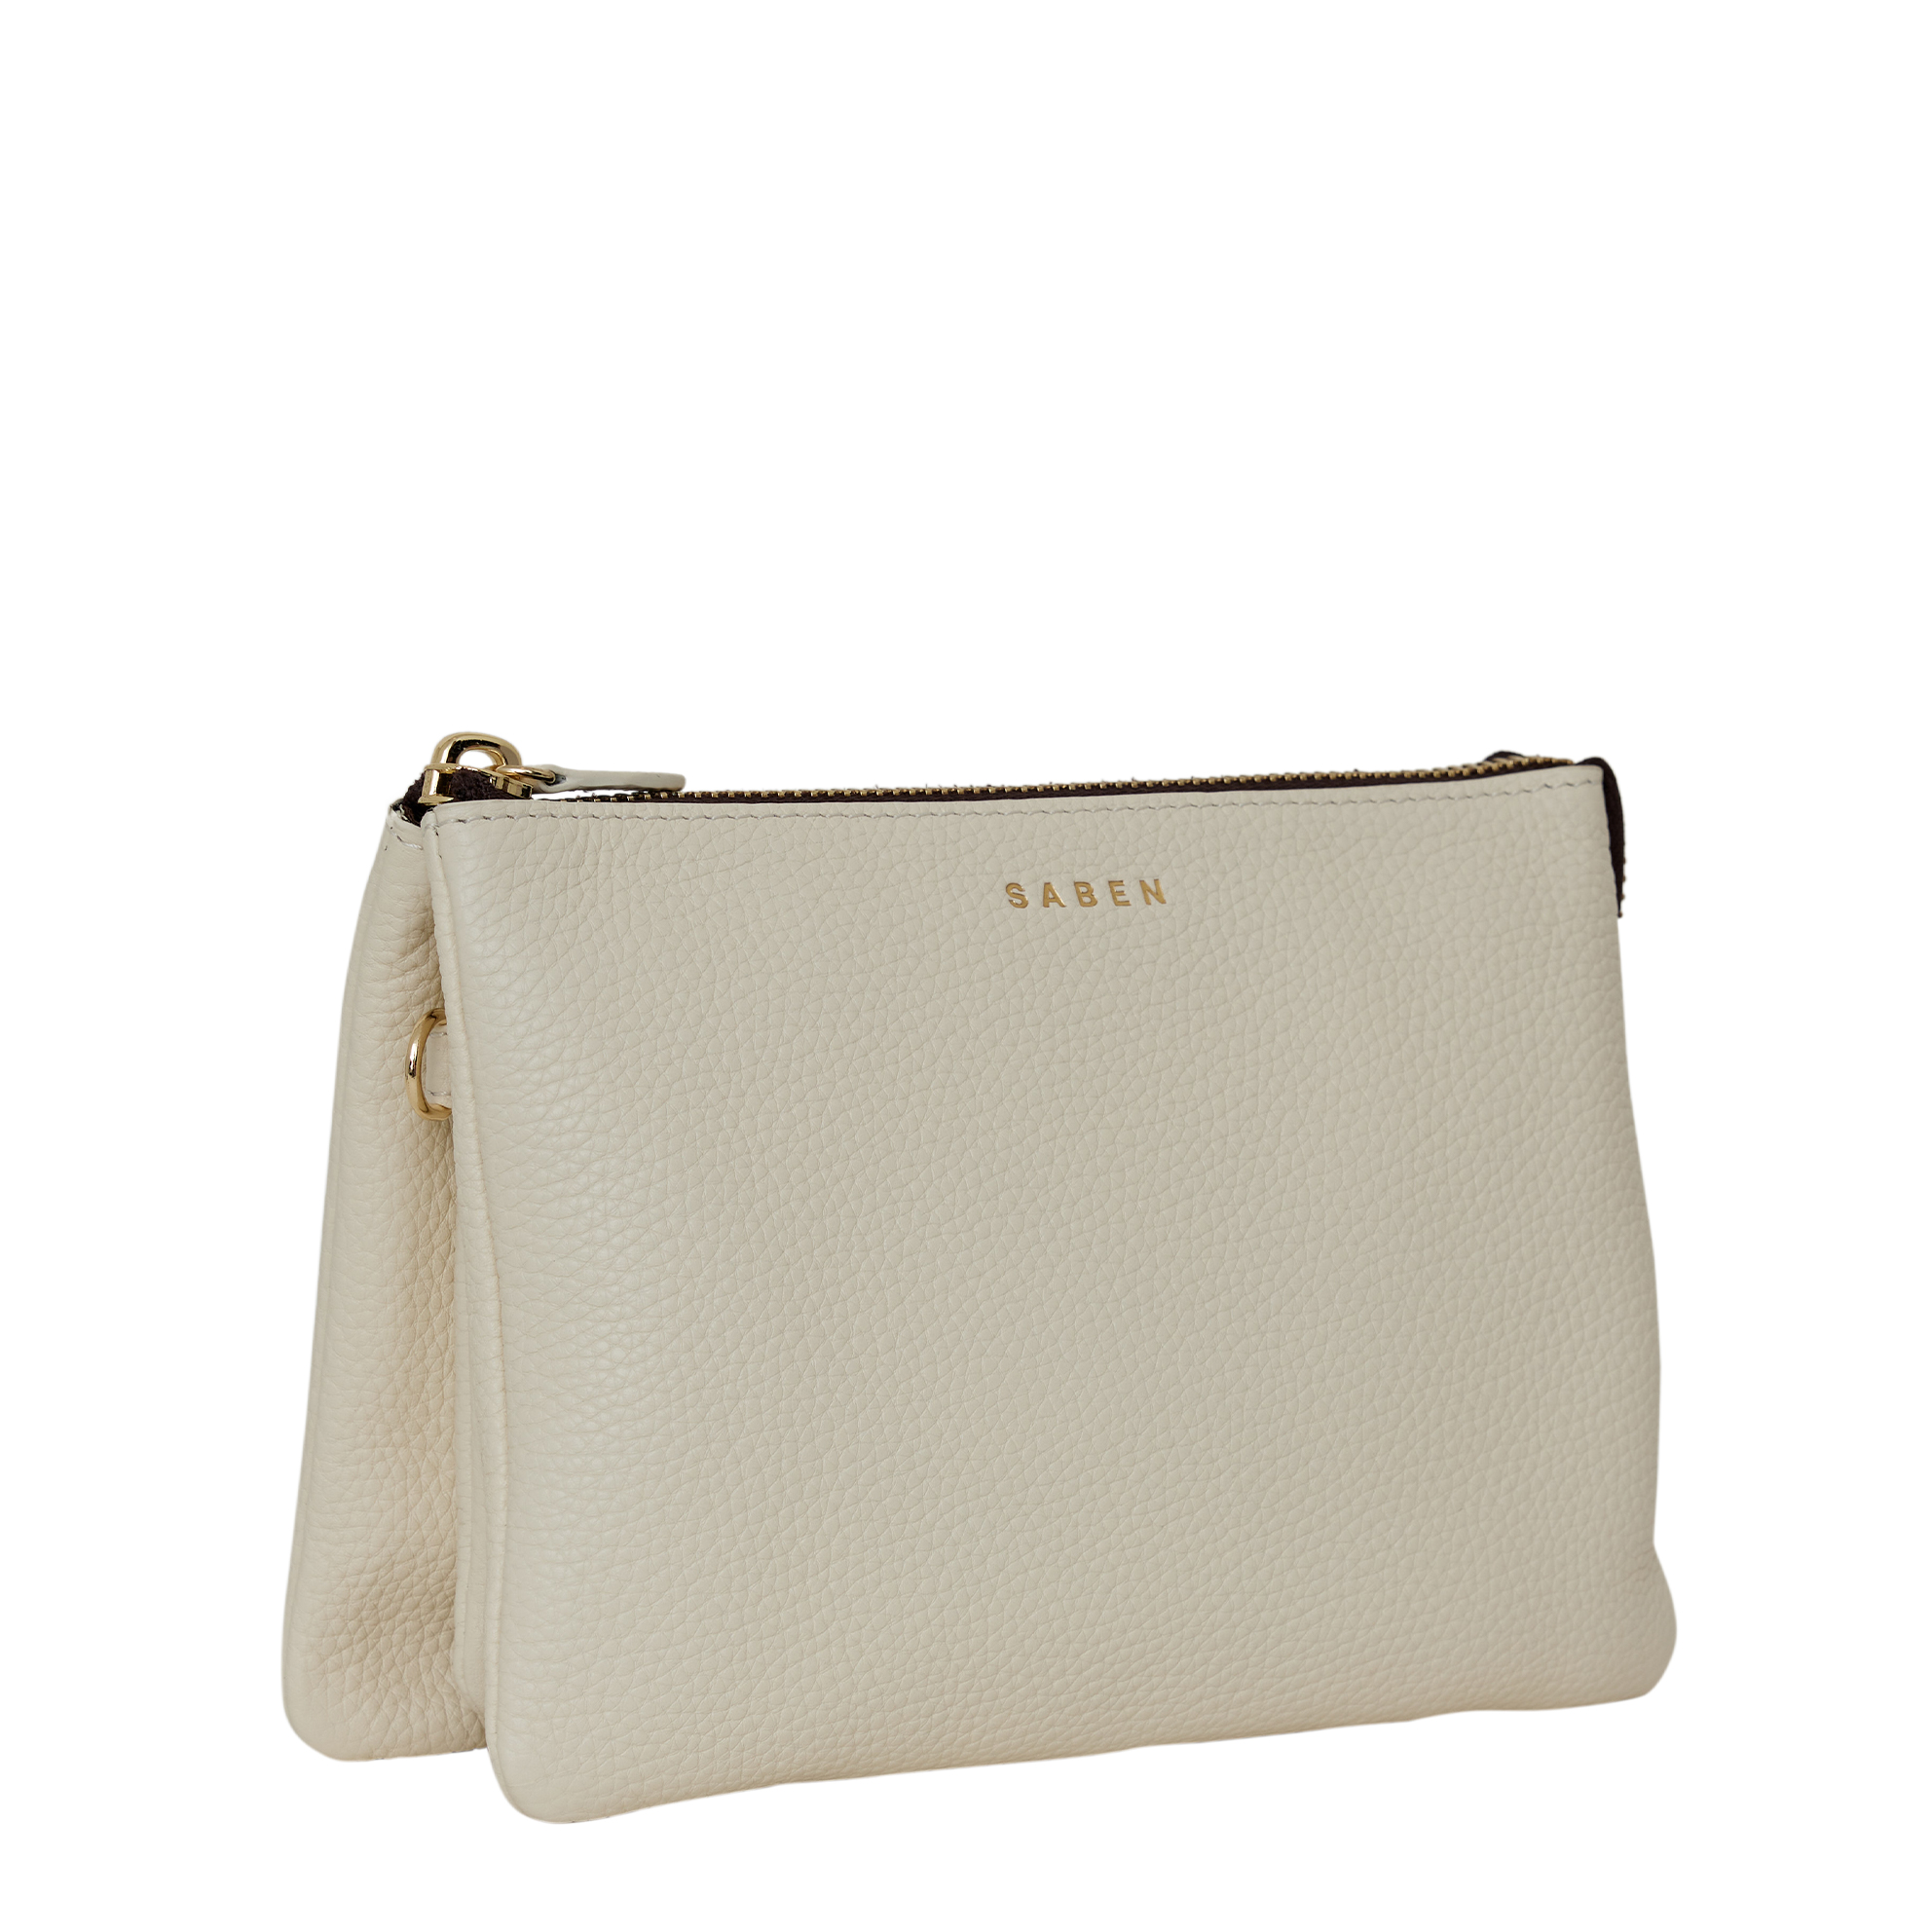 Saben Tilly's Big Sis Crossbody Vintage White - Issimo Shoes